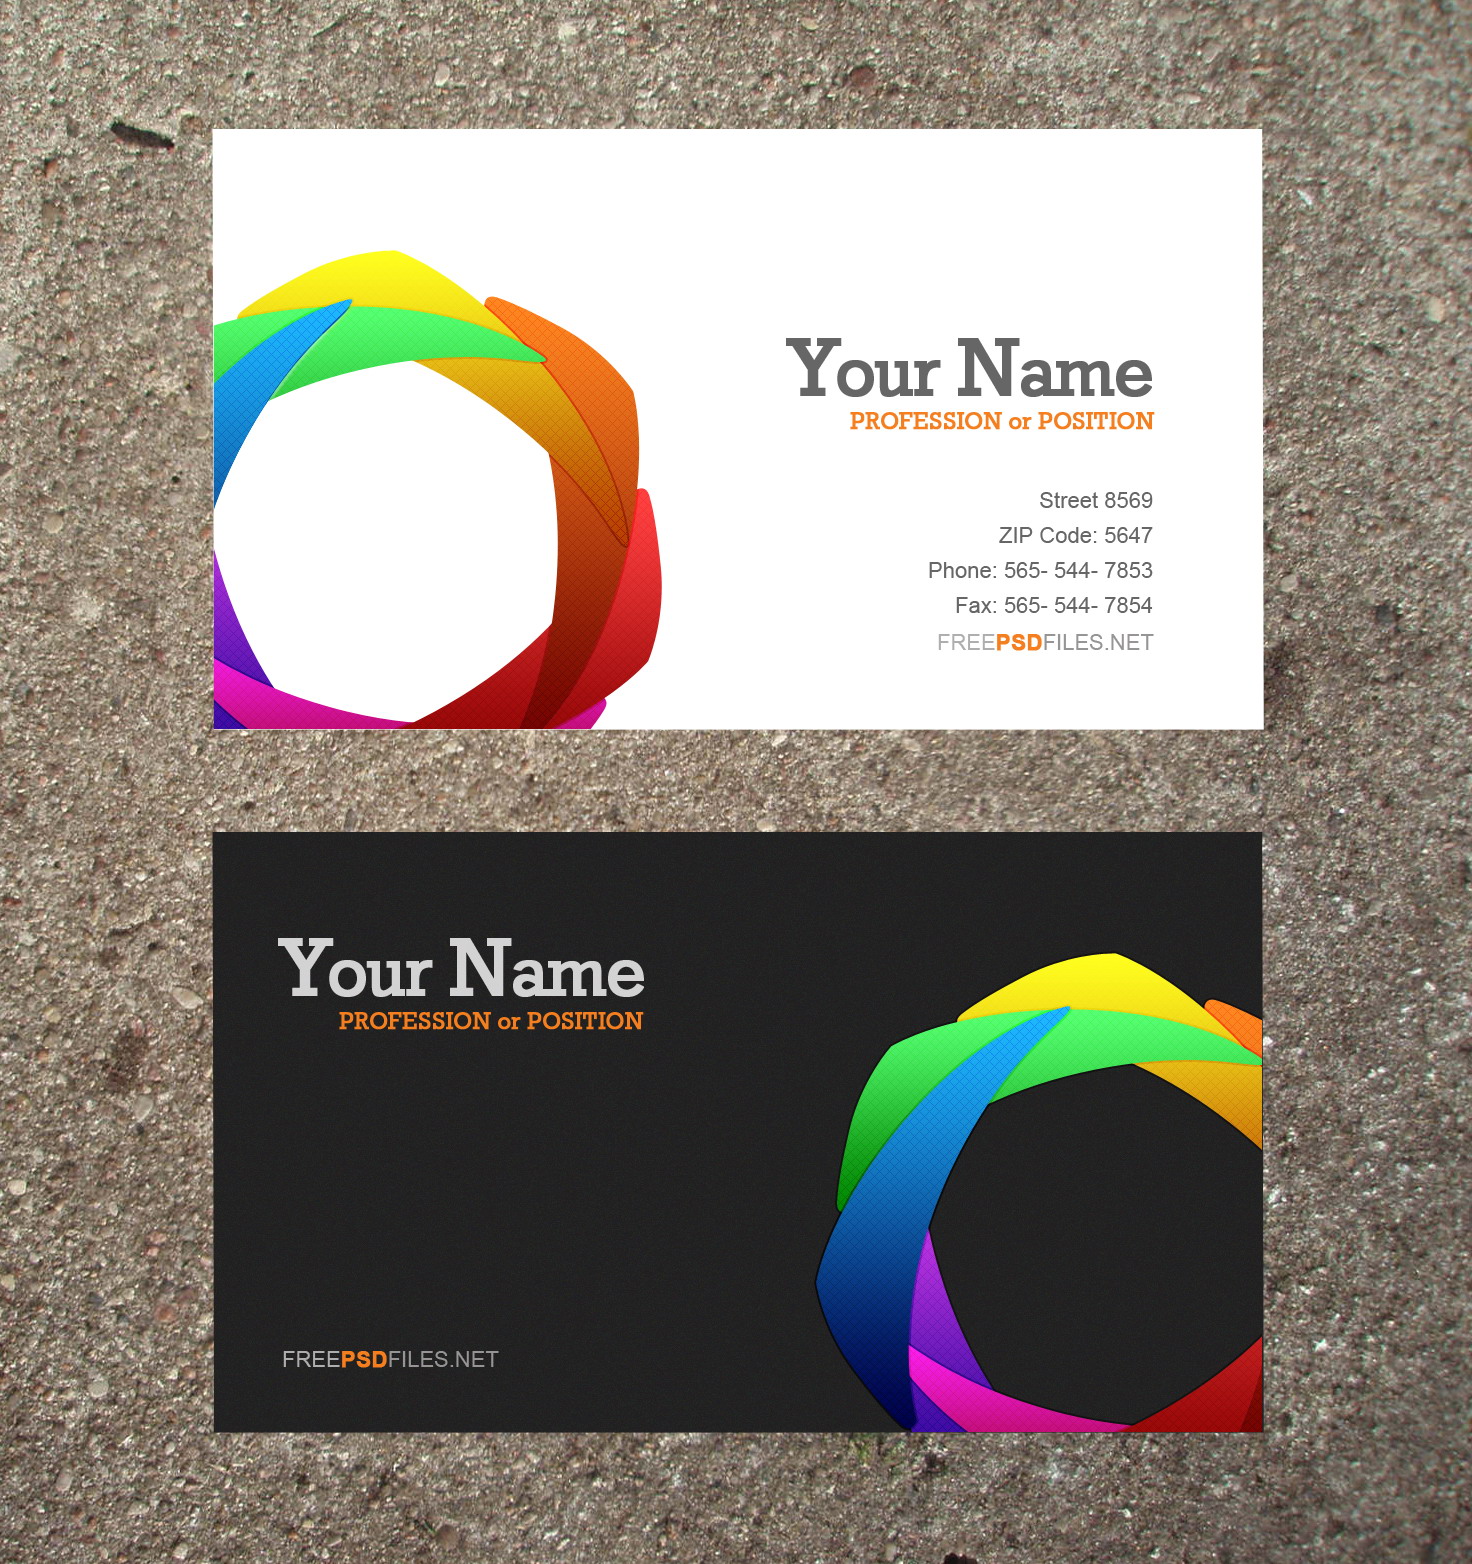 17-business-cards-templates-free-downloads-images-free-business-card